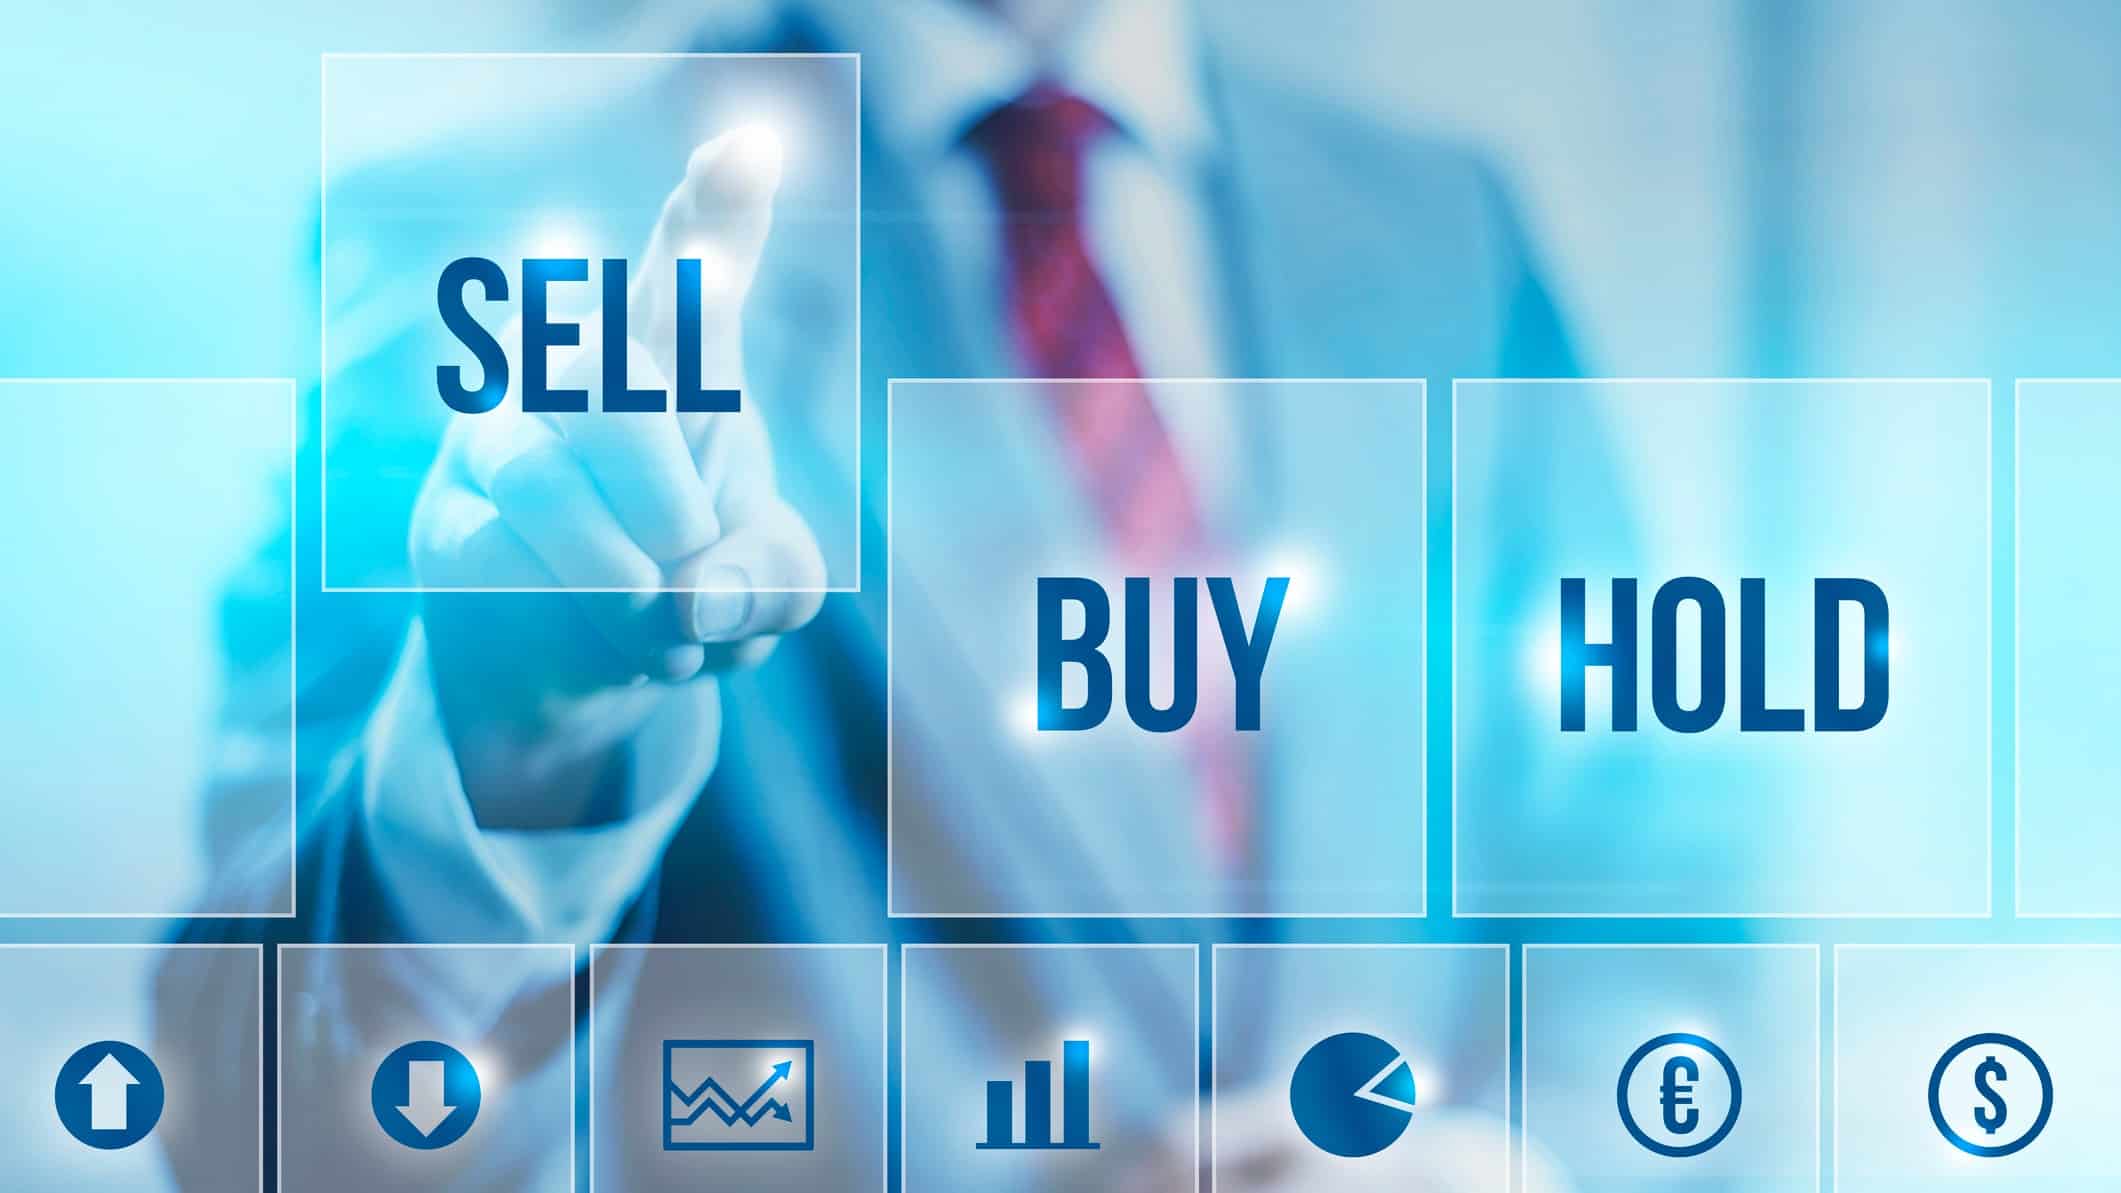 Sell buy and hold on a digital screen with a man pointing at the sell square.